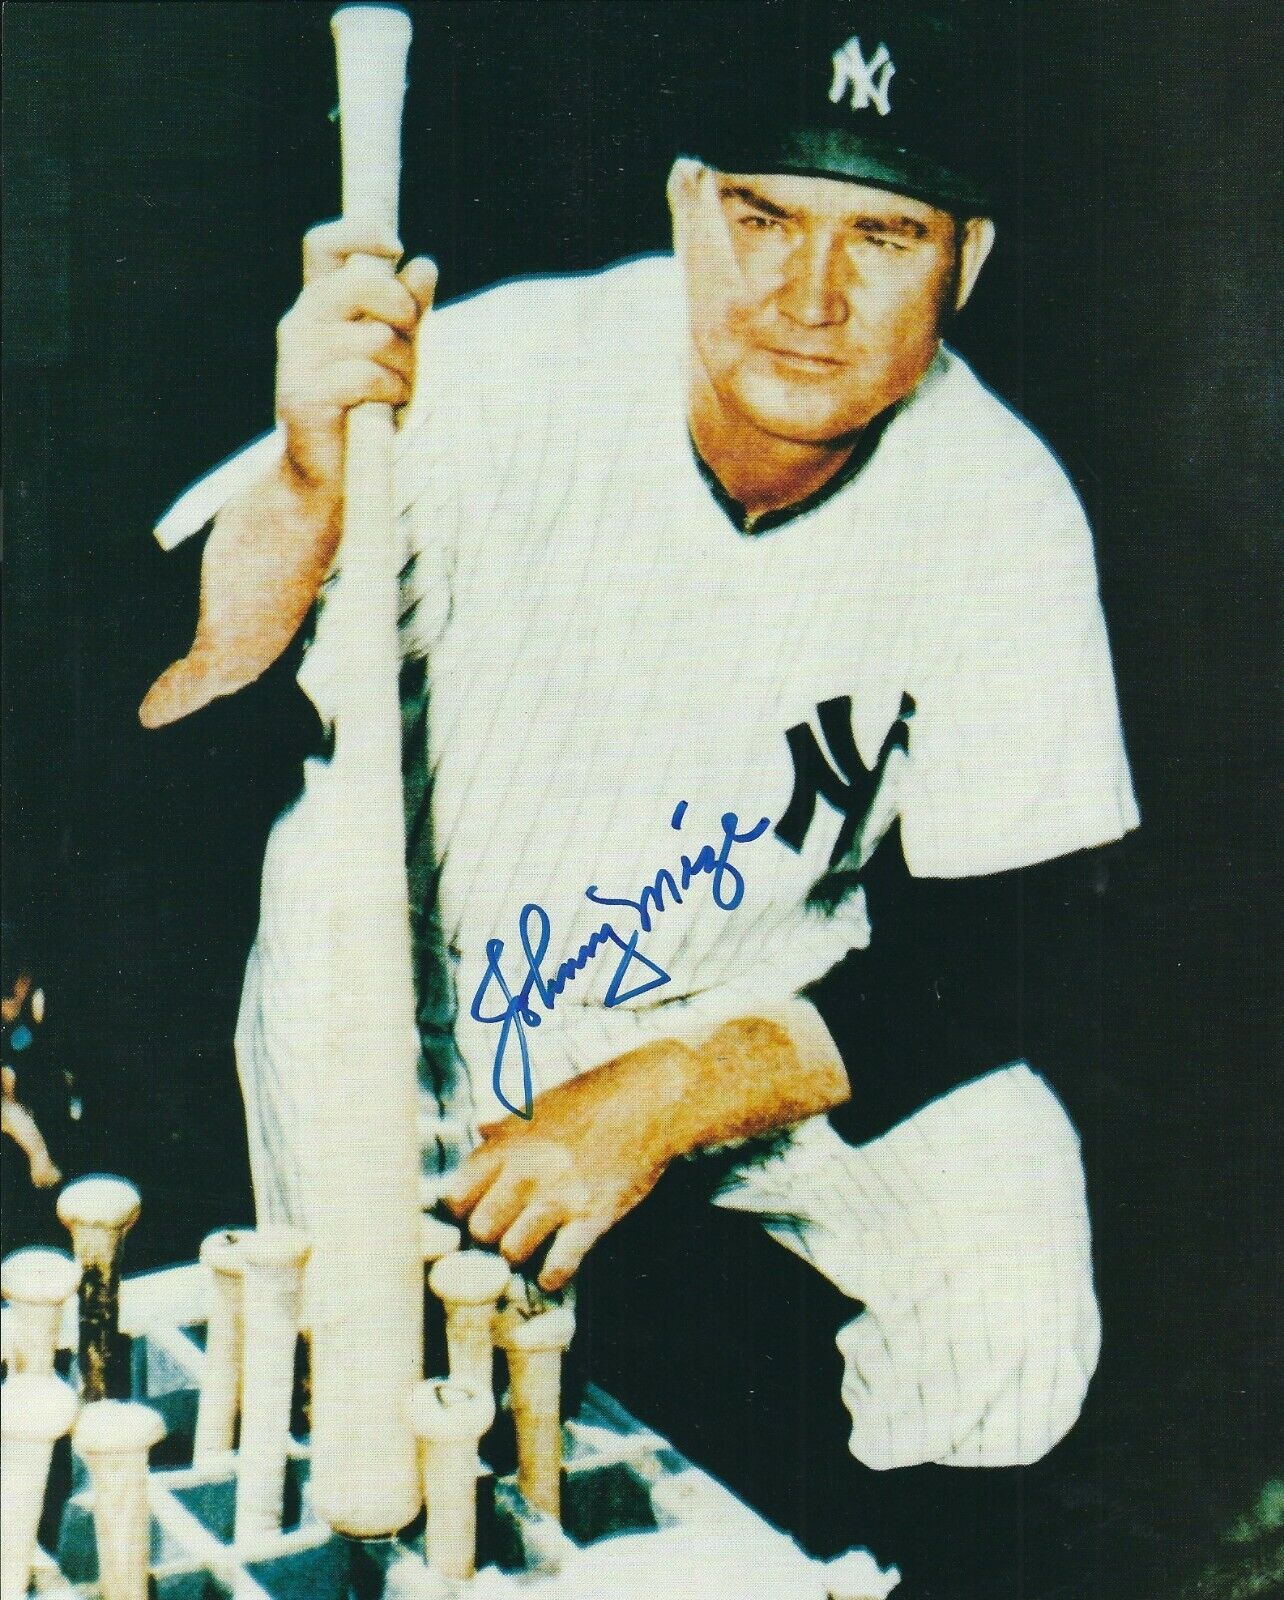 AUTOGRAPHED 8x10 JOHNNY MIZE New York Yankees Photo Poster painting W/COA